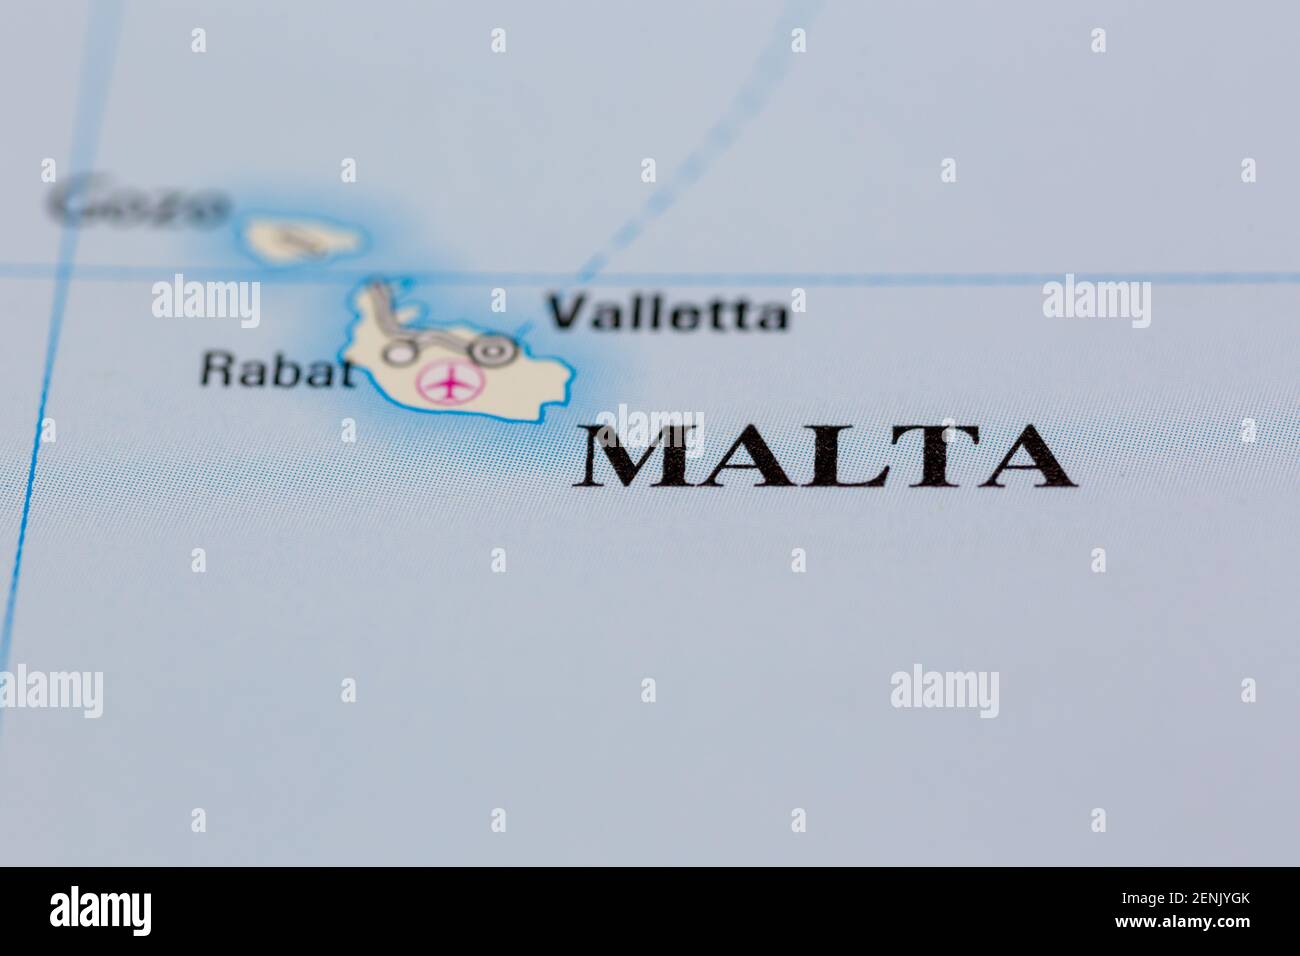 Malta shown on a Road map or a geography map Stock Photo